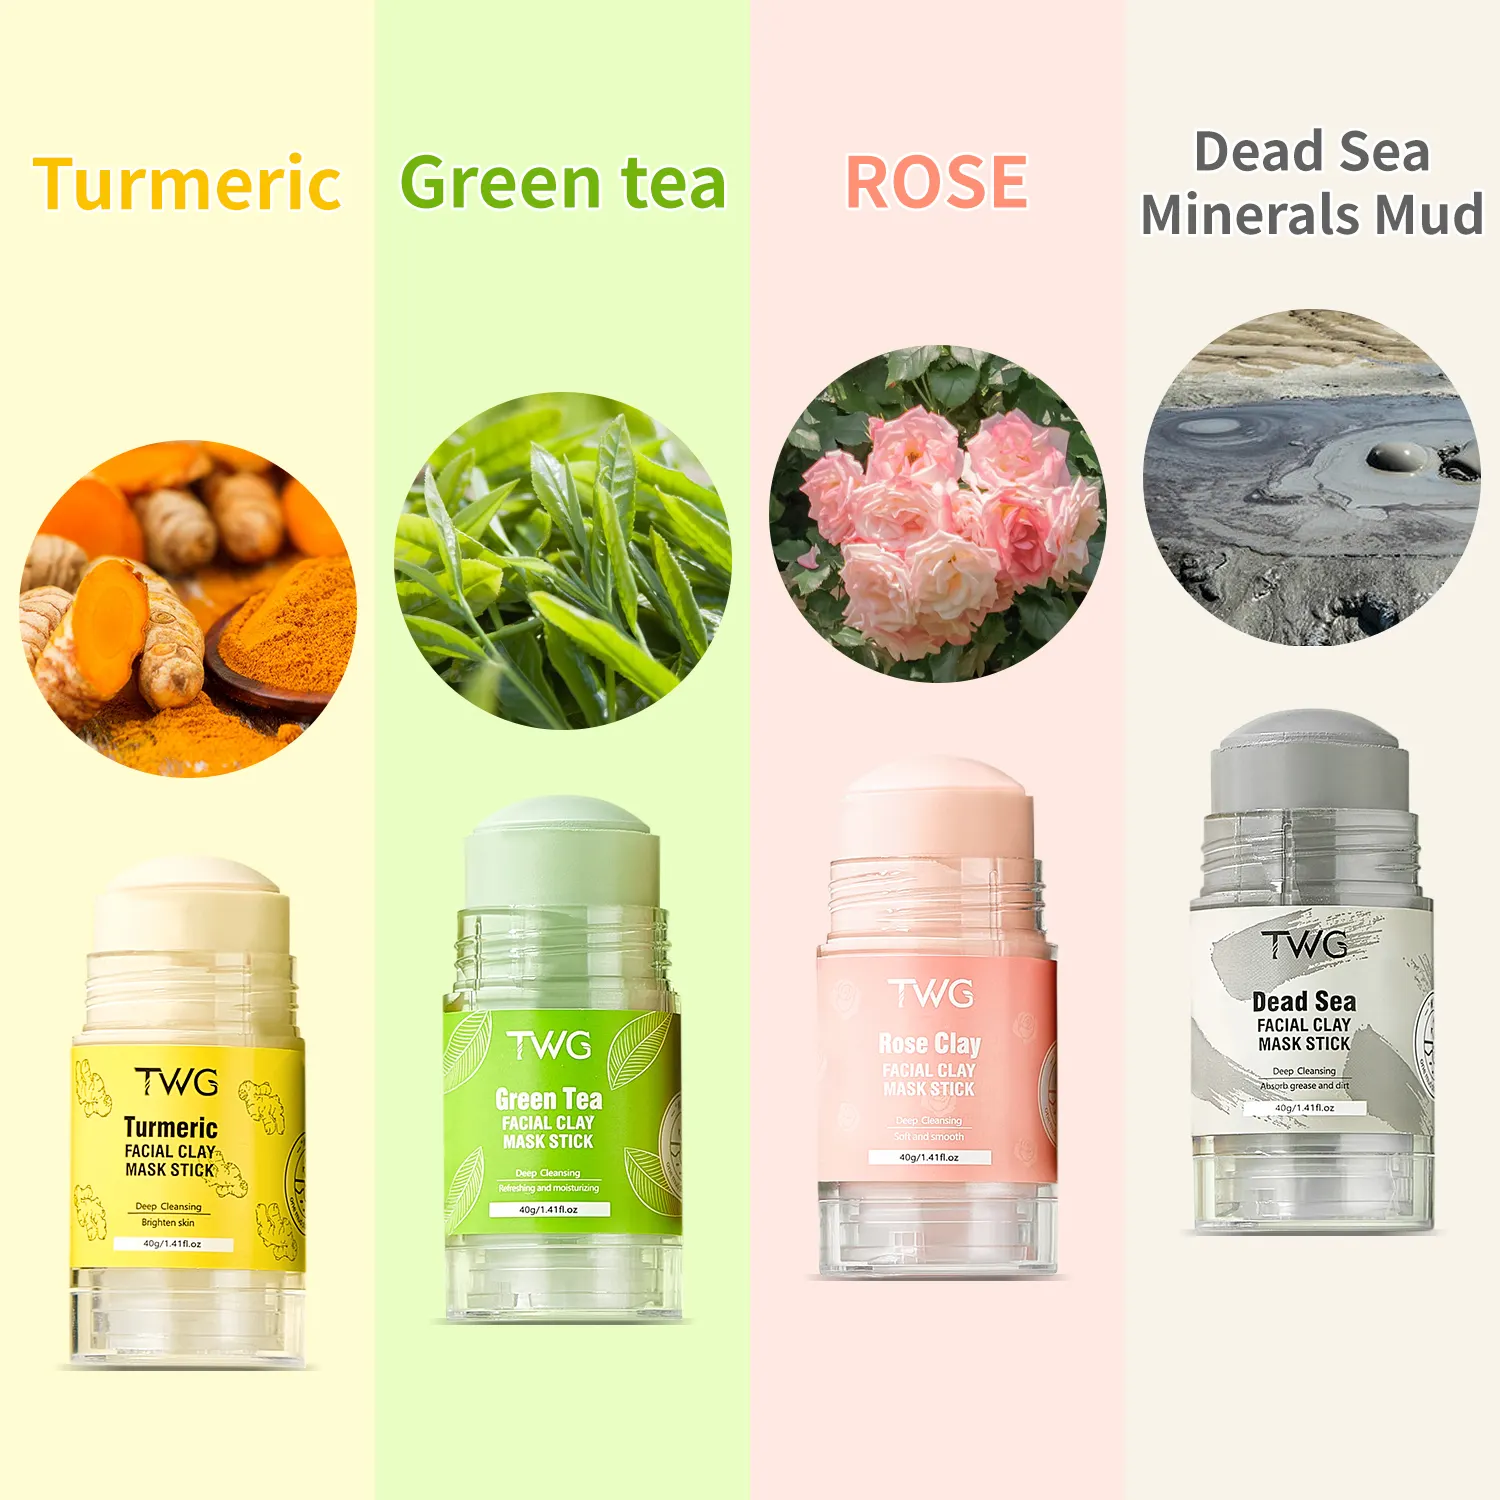 TWG Face Cleansing Mask Stick Clap Blackhead Remover Face Mud Green Tea Turmeric Face Mask Stick